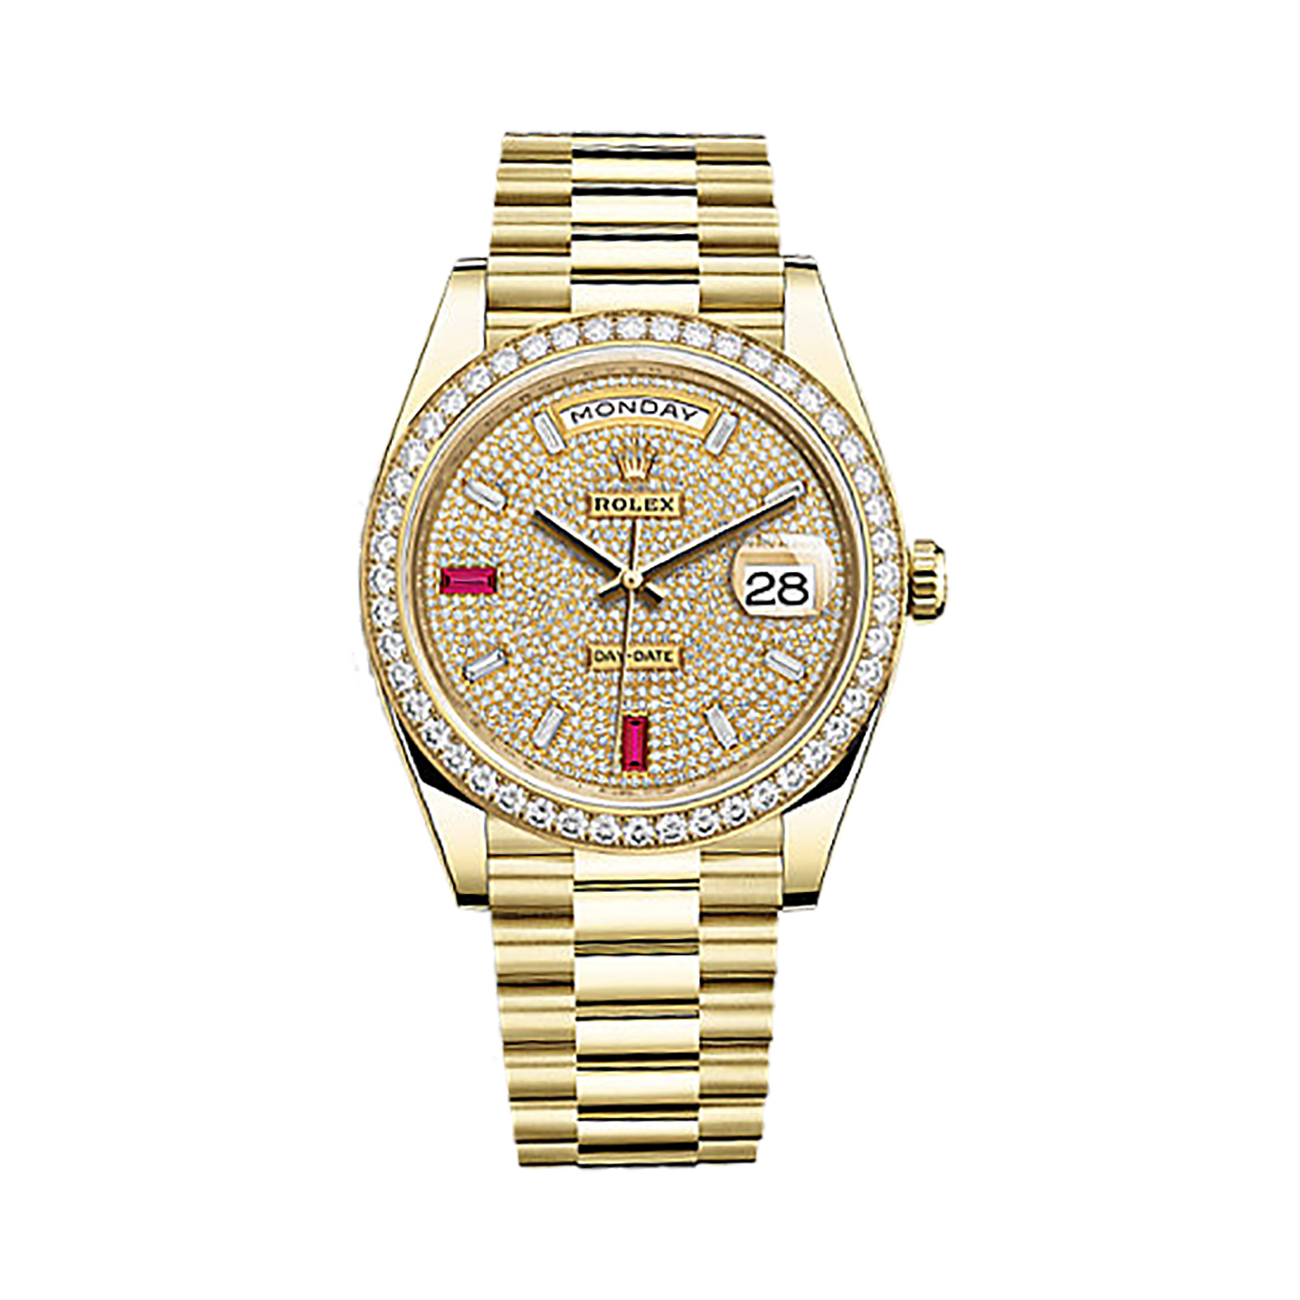 Day-Date 40 228348RBR Gold & Diamonds Watch (Paved with Diamonds and Rubies)